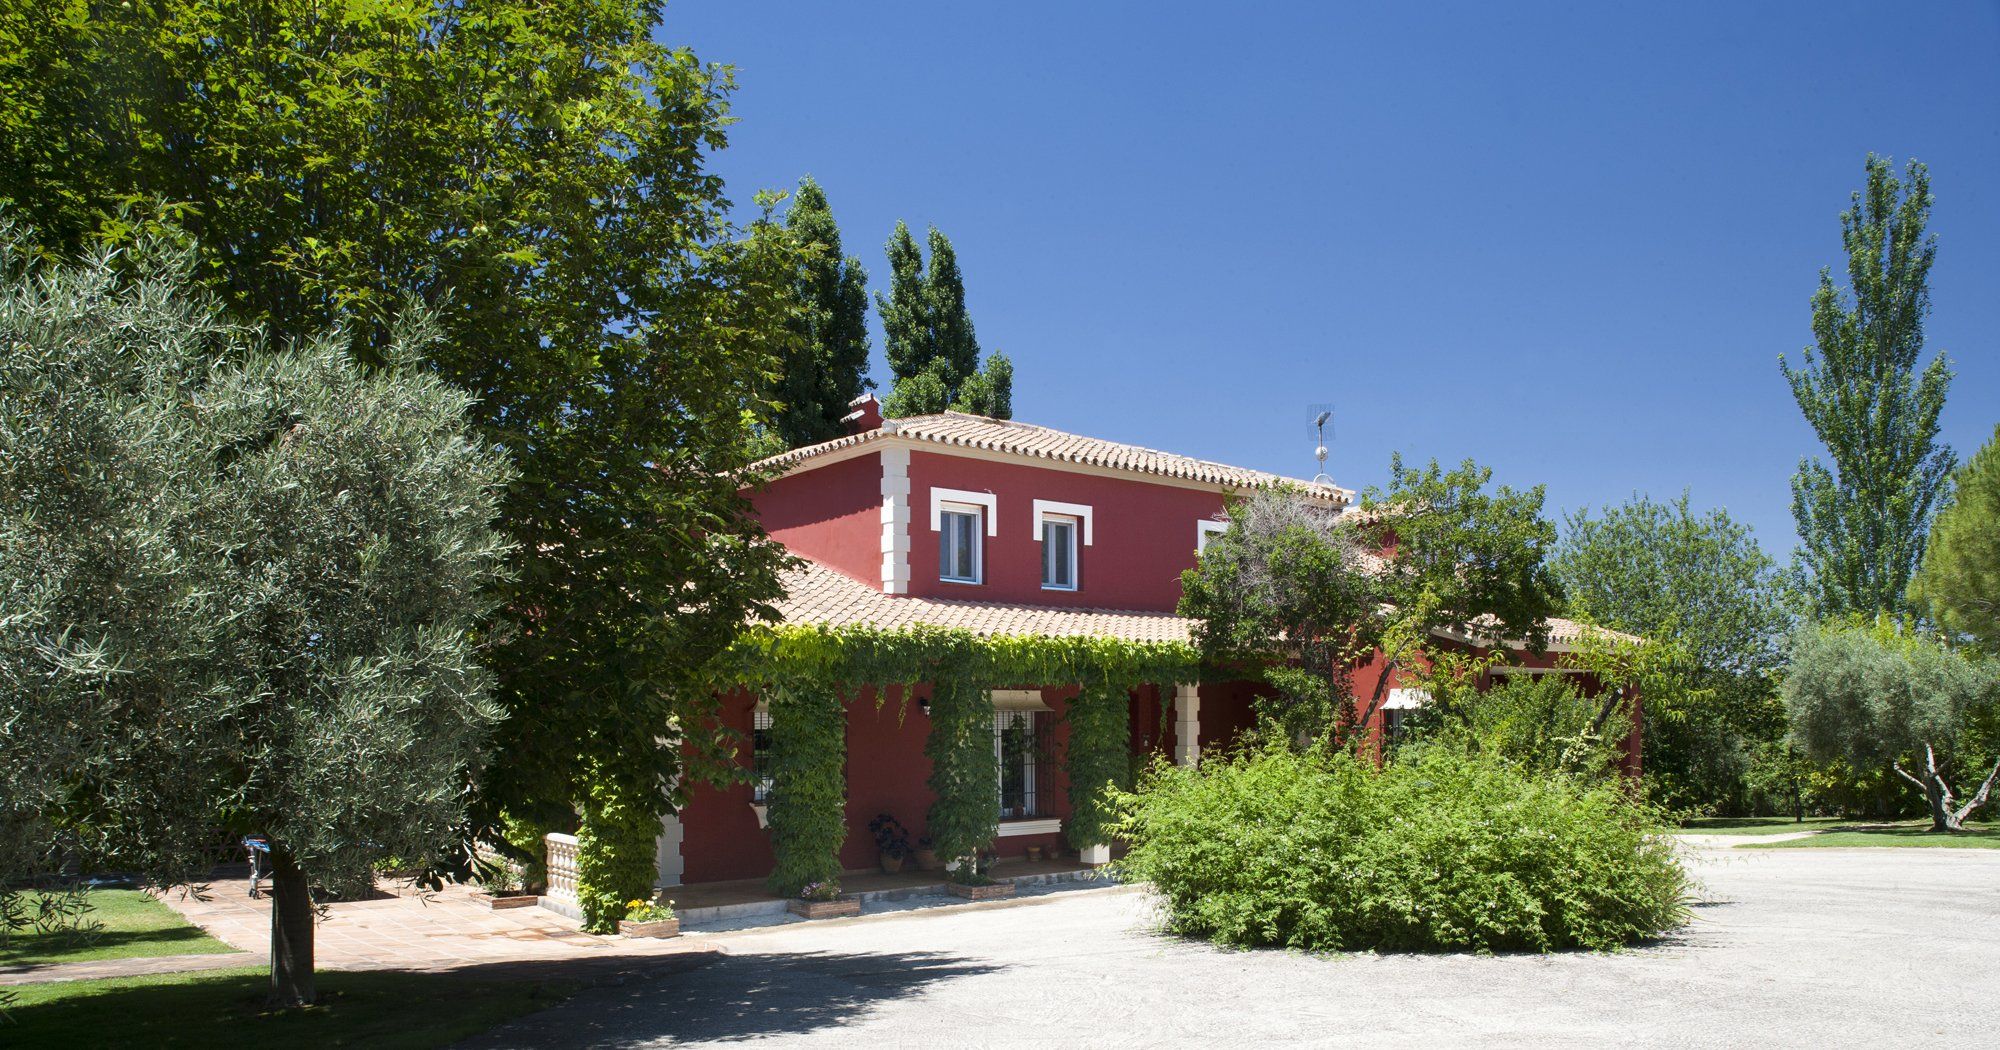 family holiday home in mature garden | ronda | spain